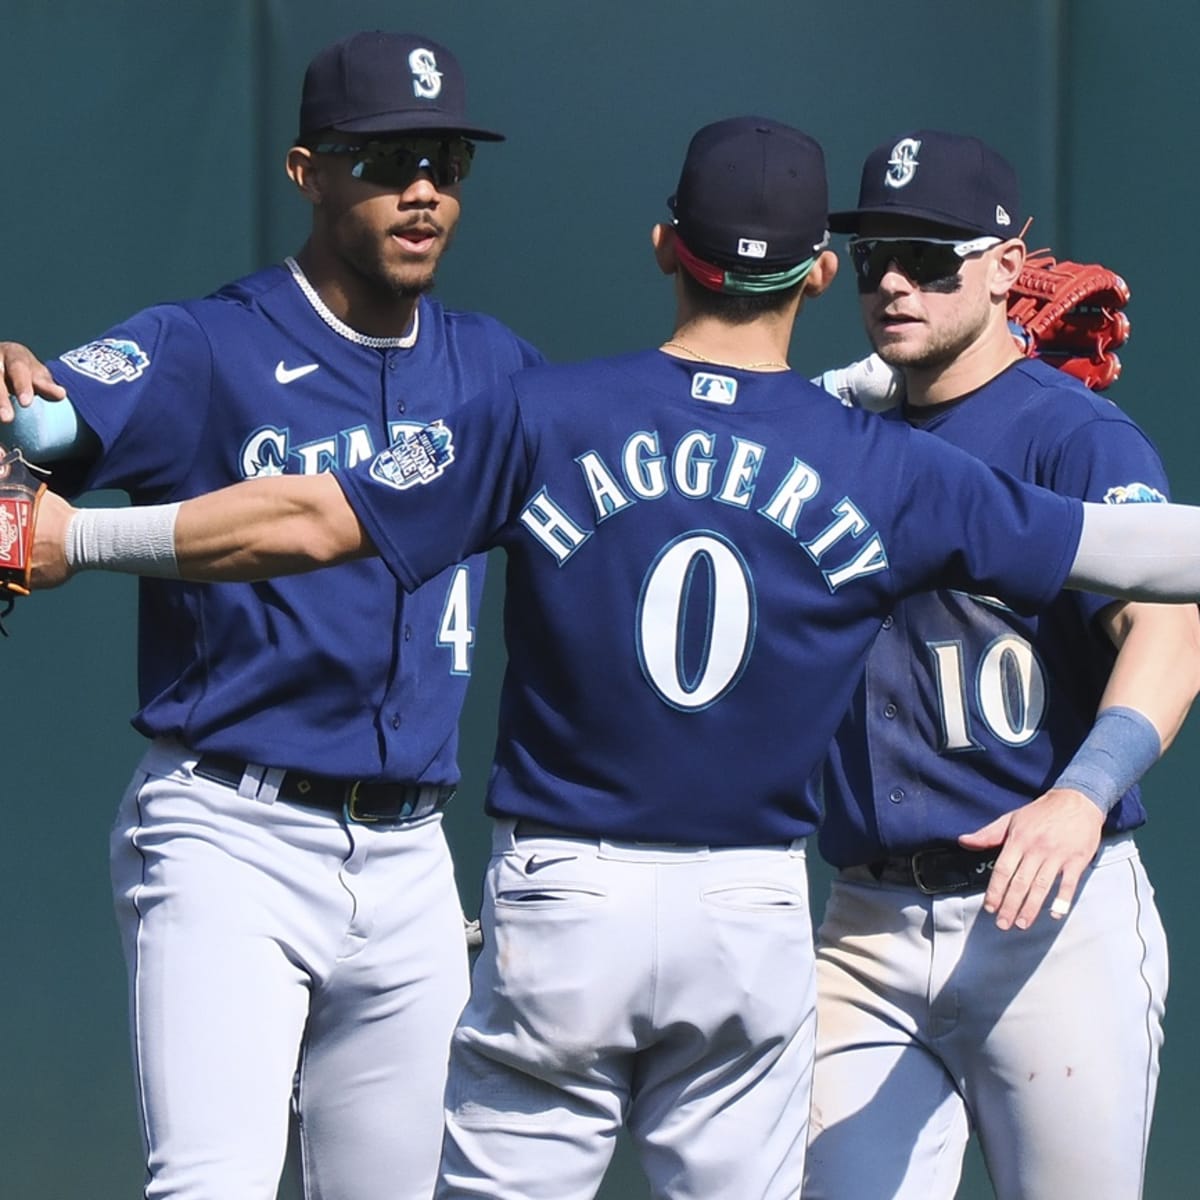 Texas Rangers Broadcasters Go Viral For Ripping Seattle Mariners' Uniforms  - Fastball